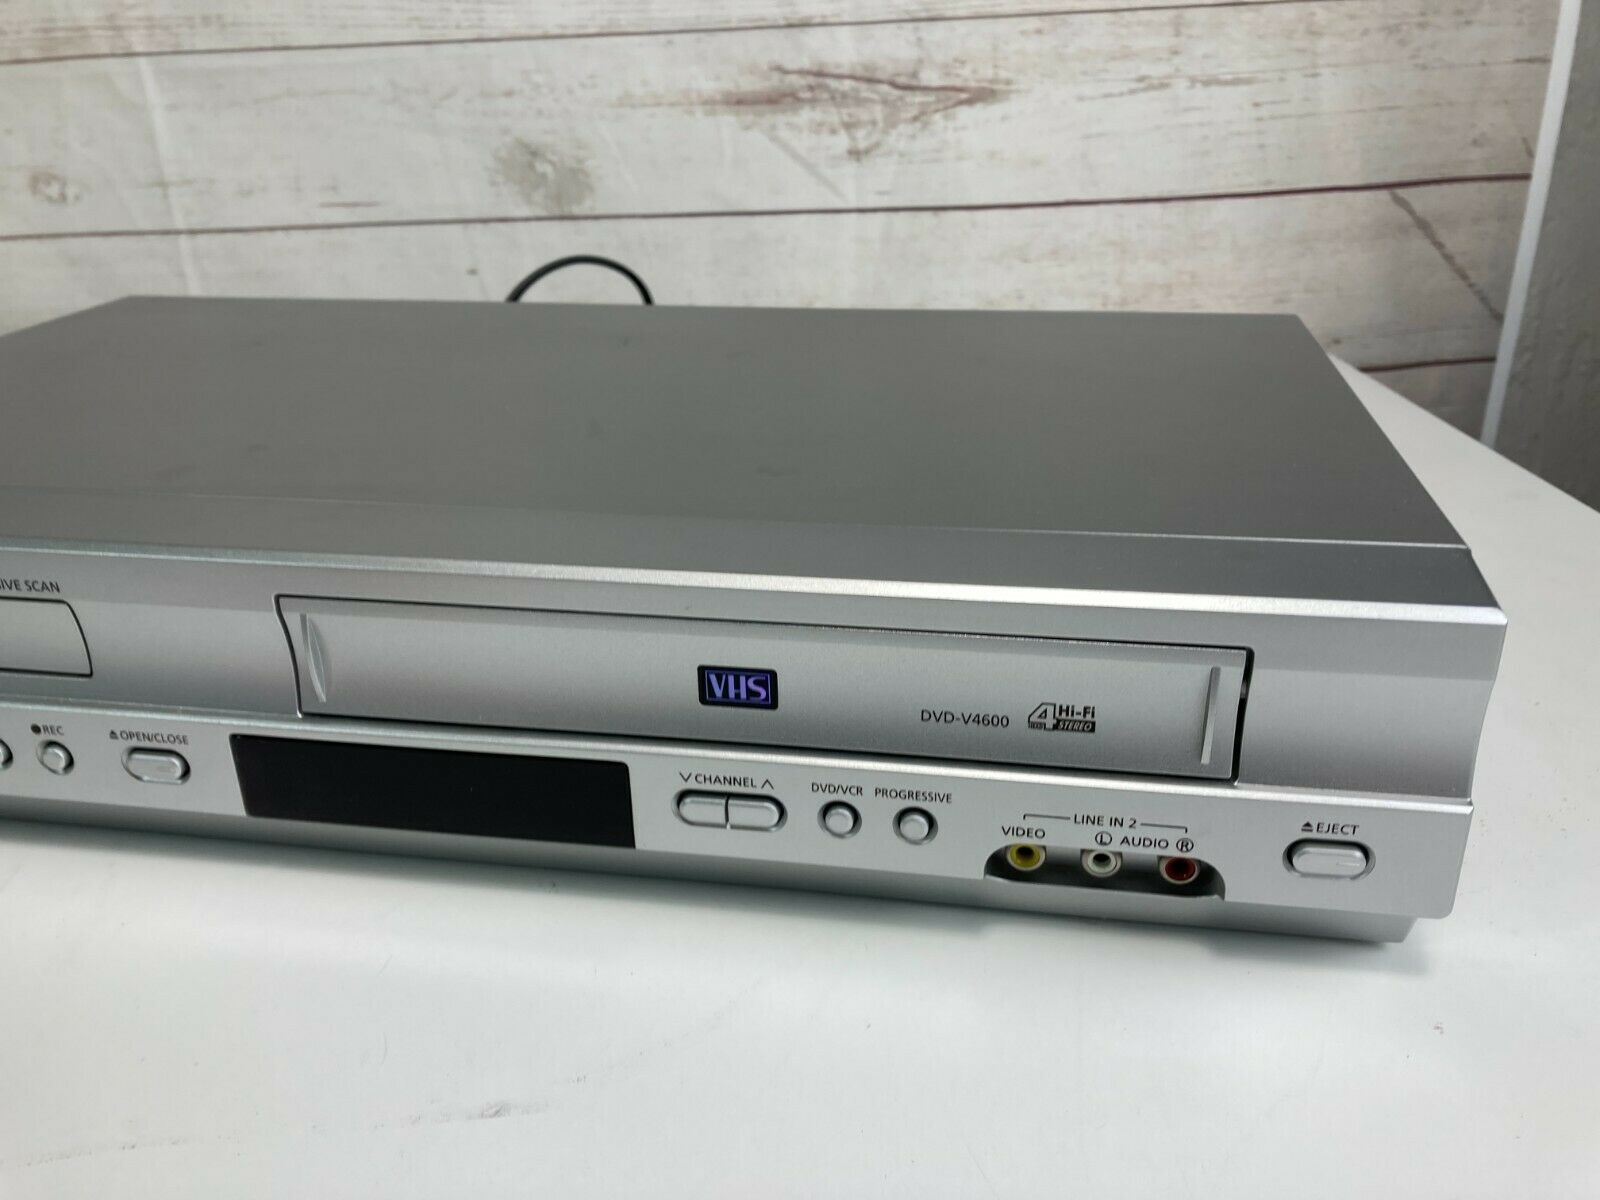 Samsung DVD-V600 4 Head Vcr Vhs Player Works and 50 similar items